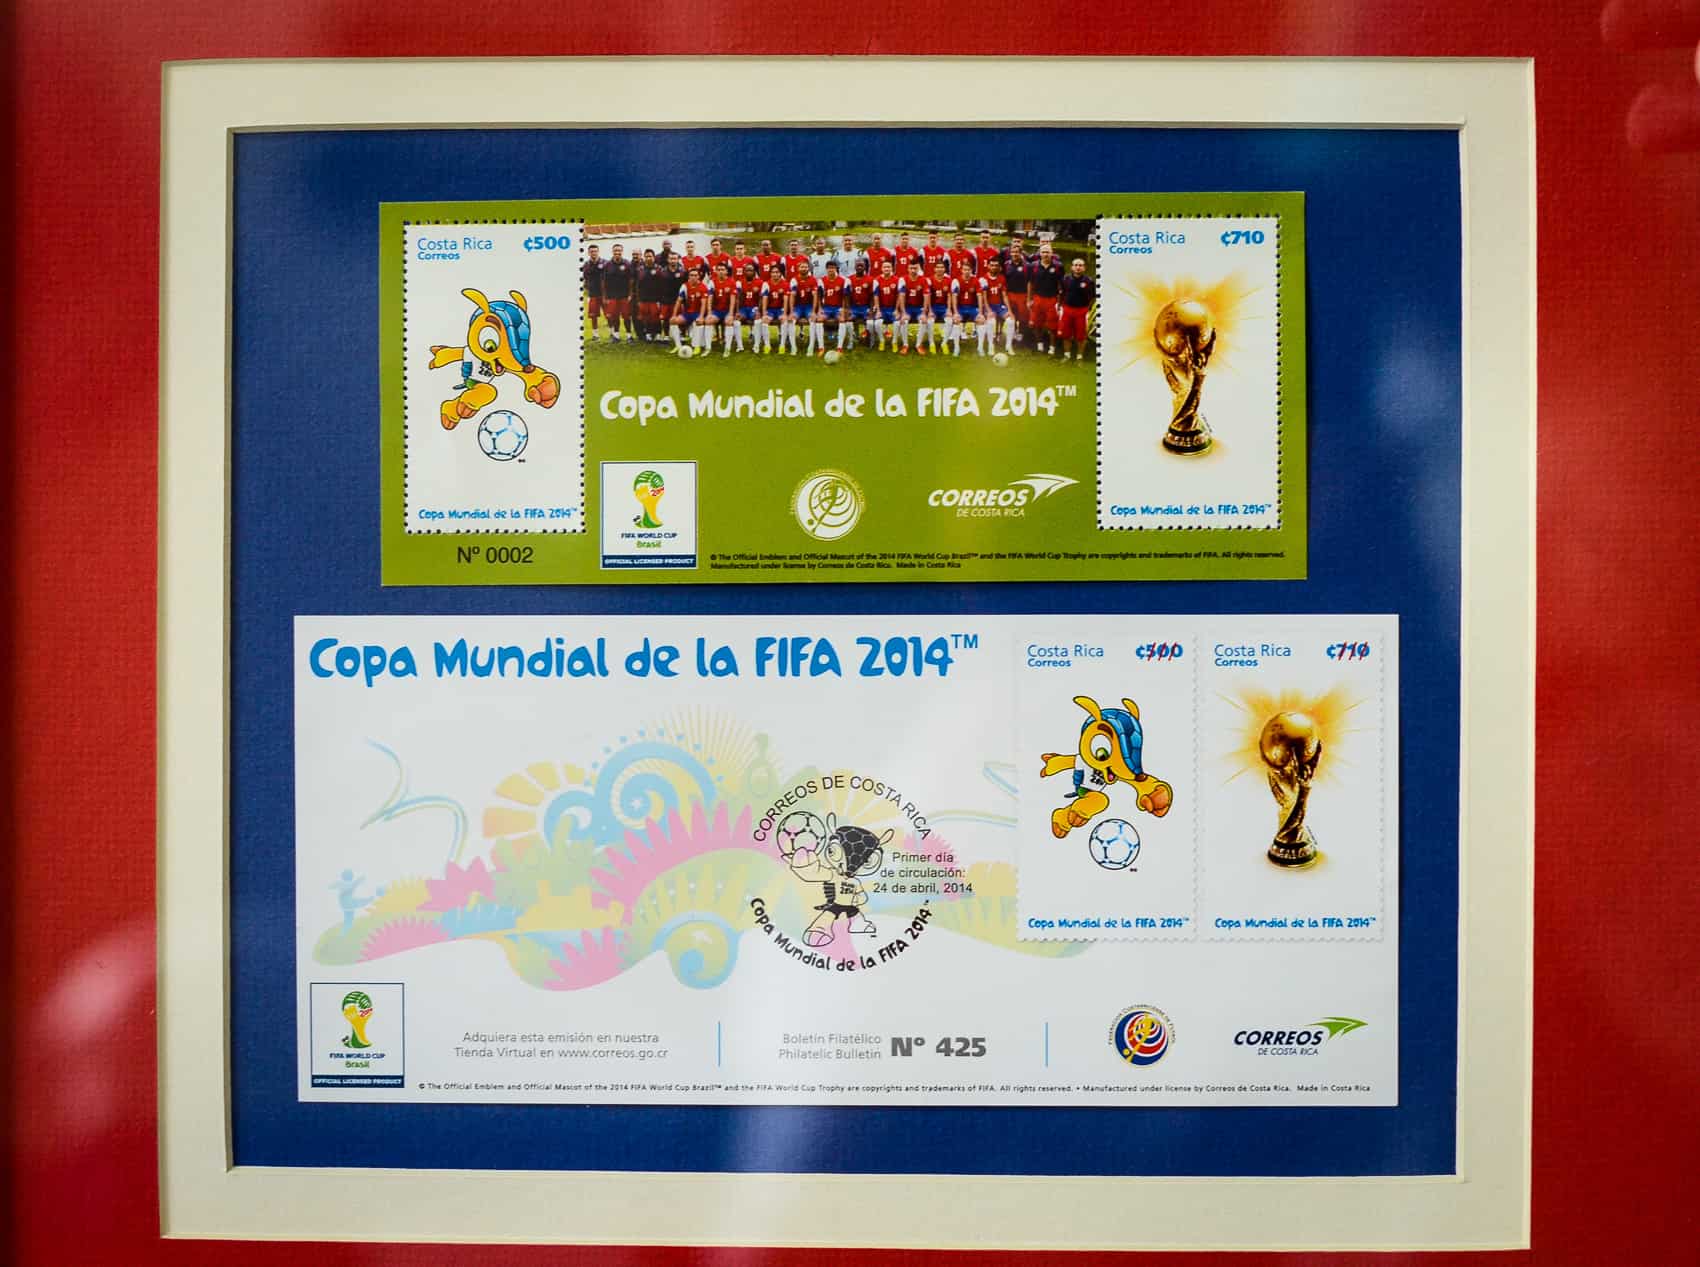 Brazil World Cup 2014 special edition stamps